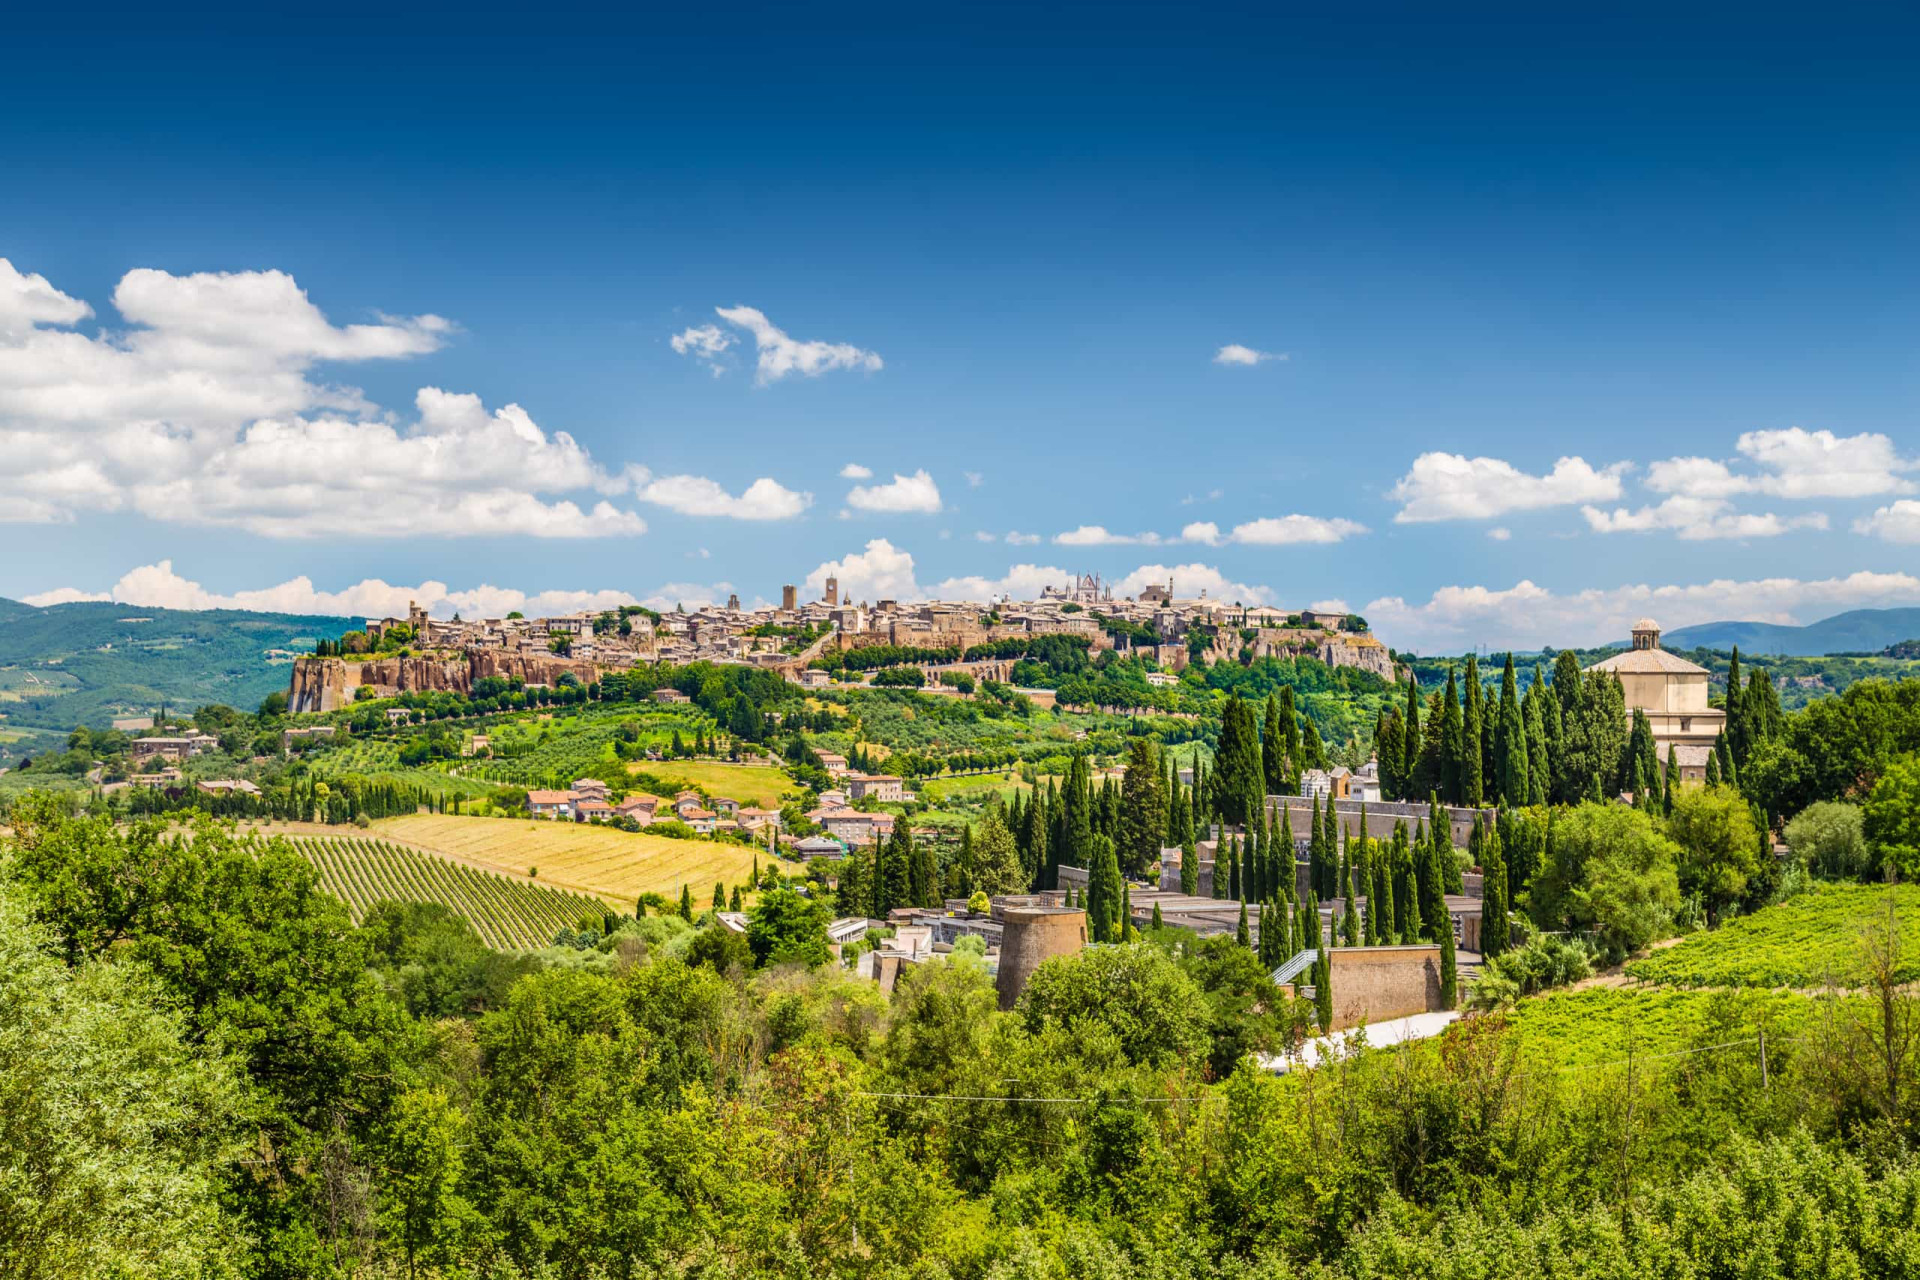 <p>Orvieto unfolds like a quilt of stone across a high bluff surrounded by the Umbrian countryside. The town's art and cultural heritage is one of the richest in Italy.</p>